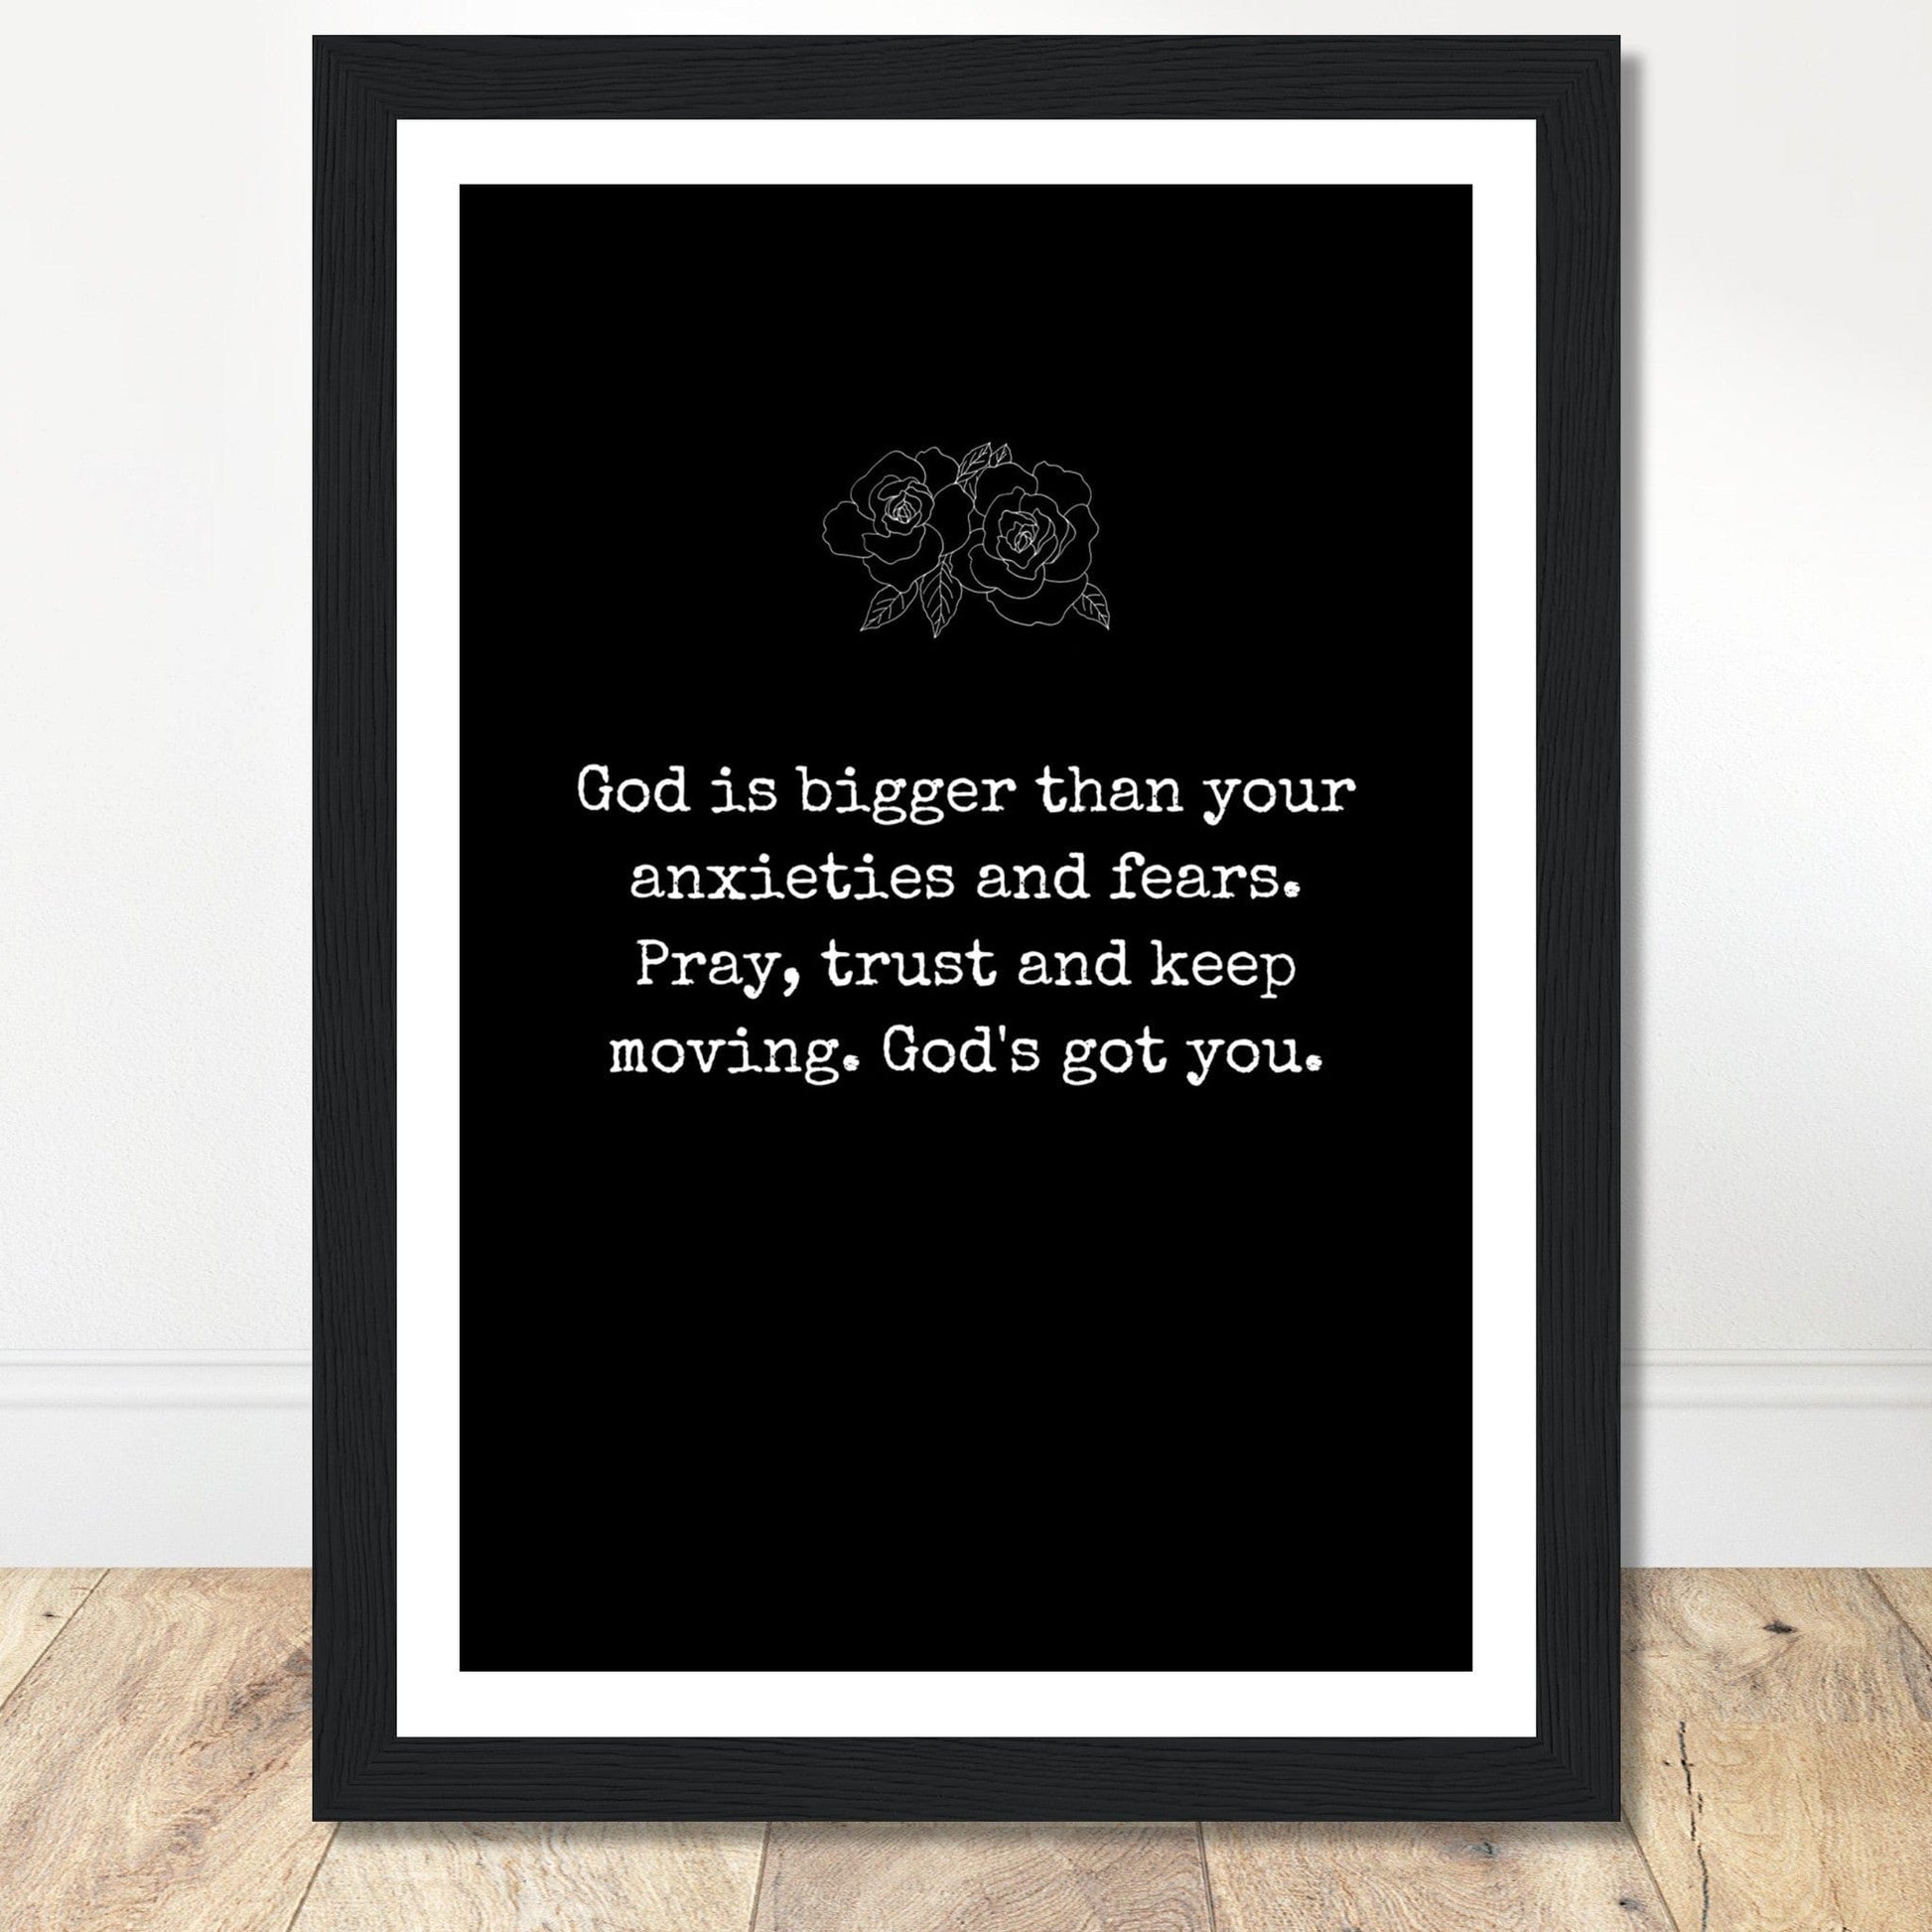 Coffee With My Father Print Material 21x29.7 cm / 8x12″ / Framed / Black frame God Is Bigger - Quote Print